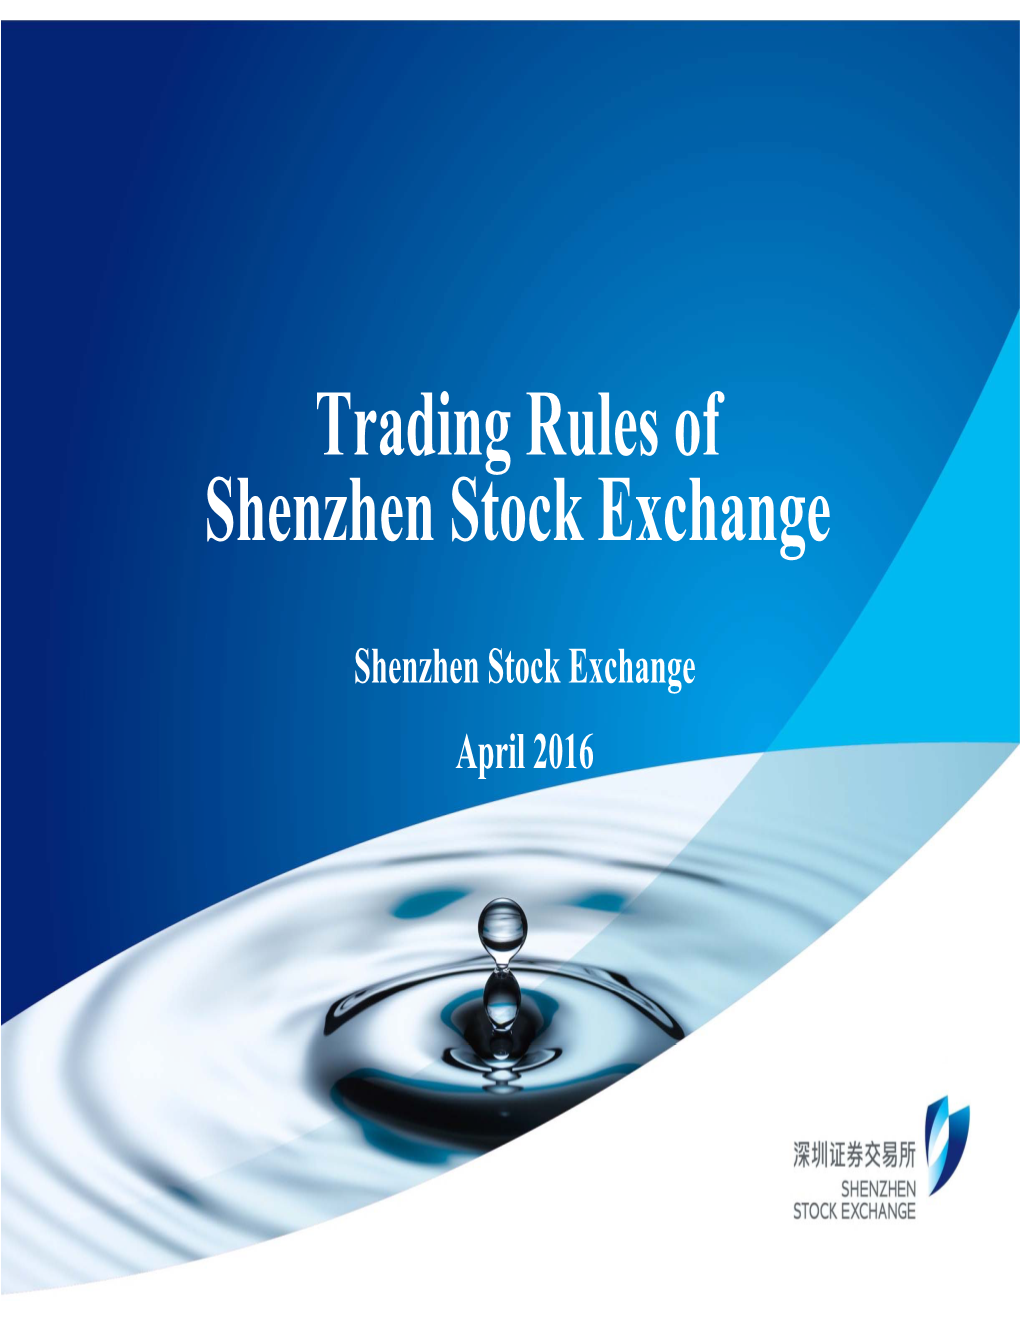 Trading Rules of Shenzhen Stock Exchange